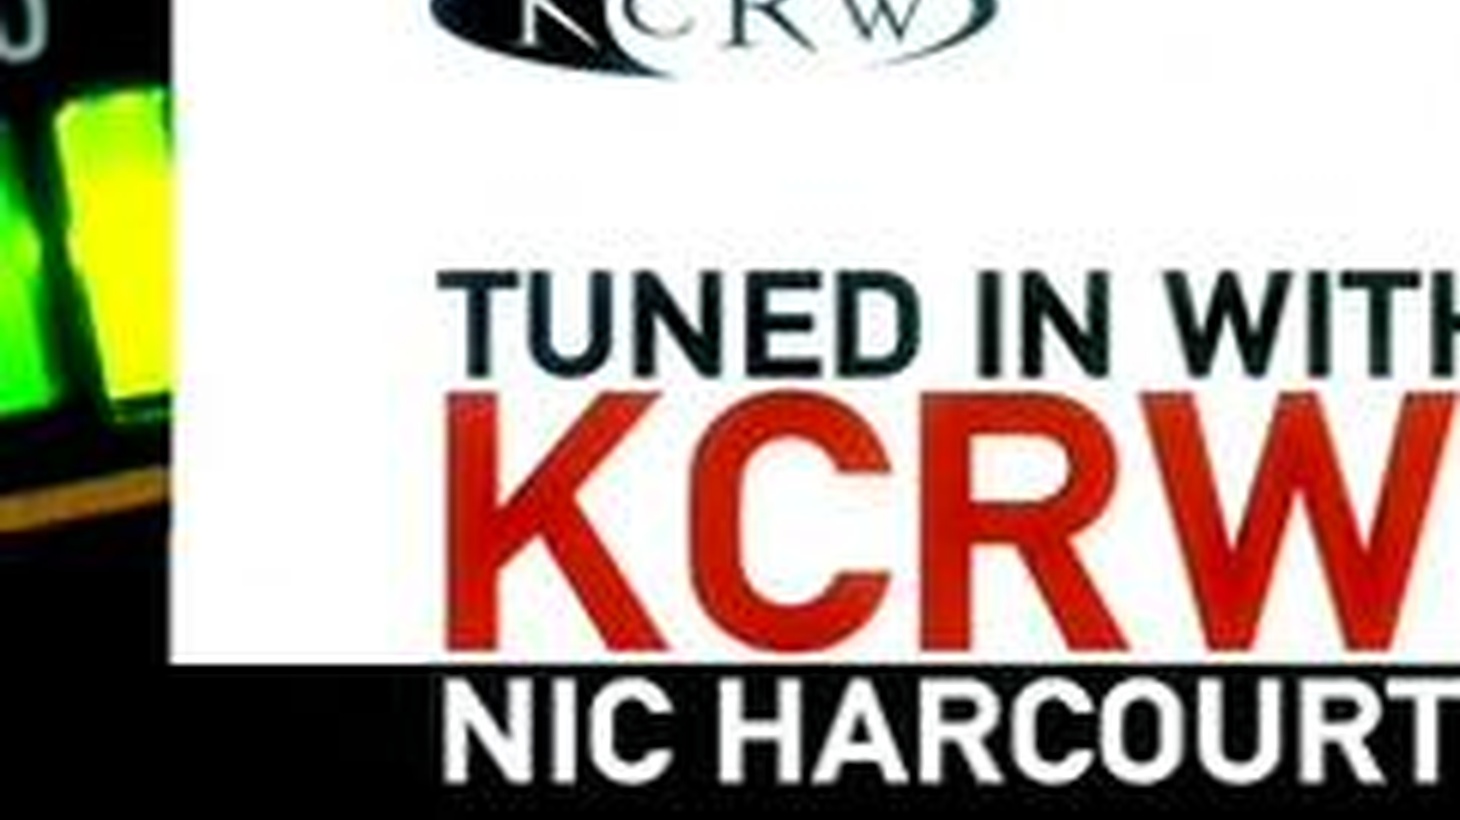 In this episode Nic Harcourt features songs from The Broken West (NOW OR HEAVEN), Jolie Holland (THE LIVING AND THE DEAD), Herman Dune (NEXT YEAR IN ZION), and Calexico (CARRIED TO DUST). Download this video as well as daily free music tracks at http://www.KCRW.com.